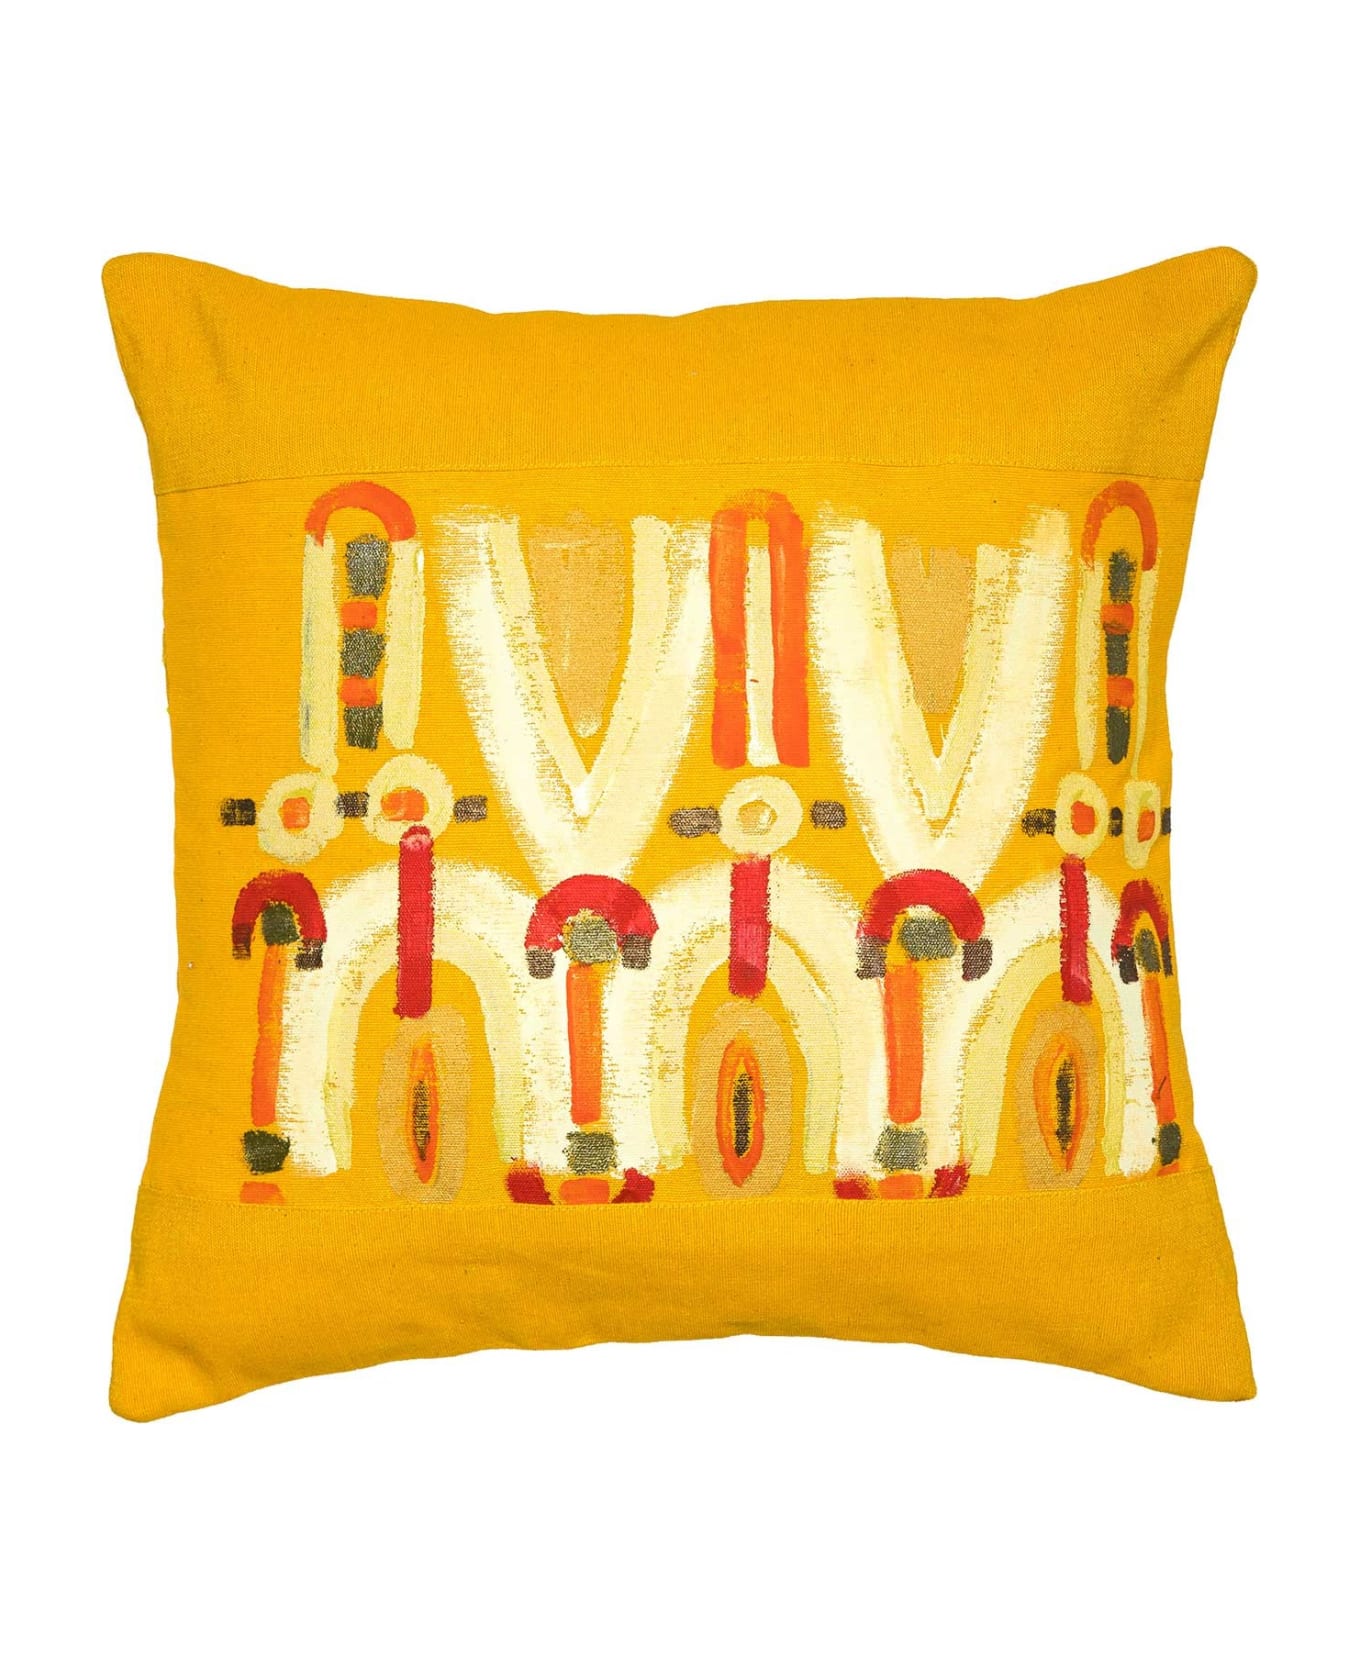 Le Botteghe su Gologone Cotton Hand Painted Indoor Cushion 70x70 cm - Yellow Fantasy